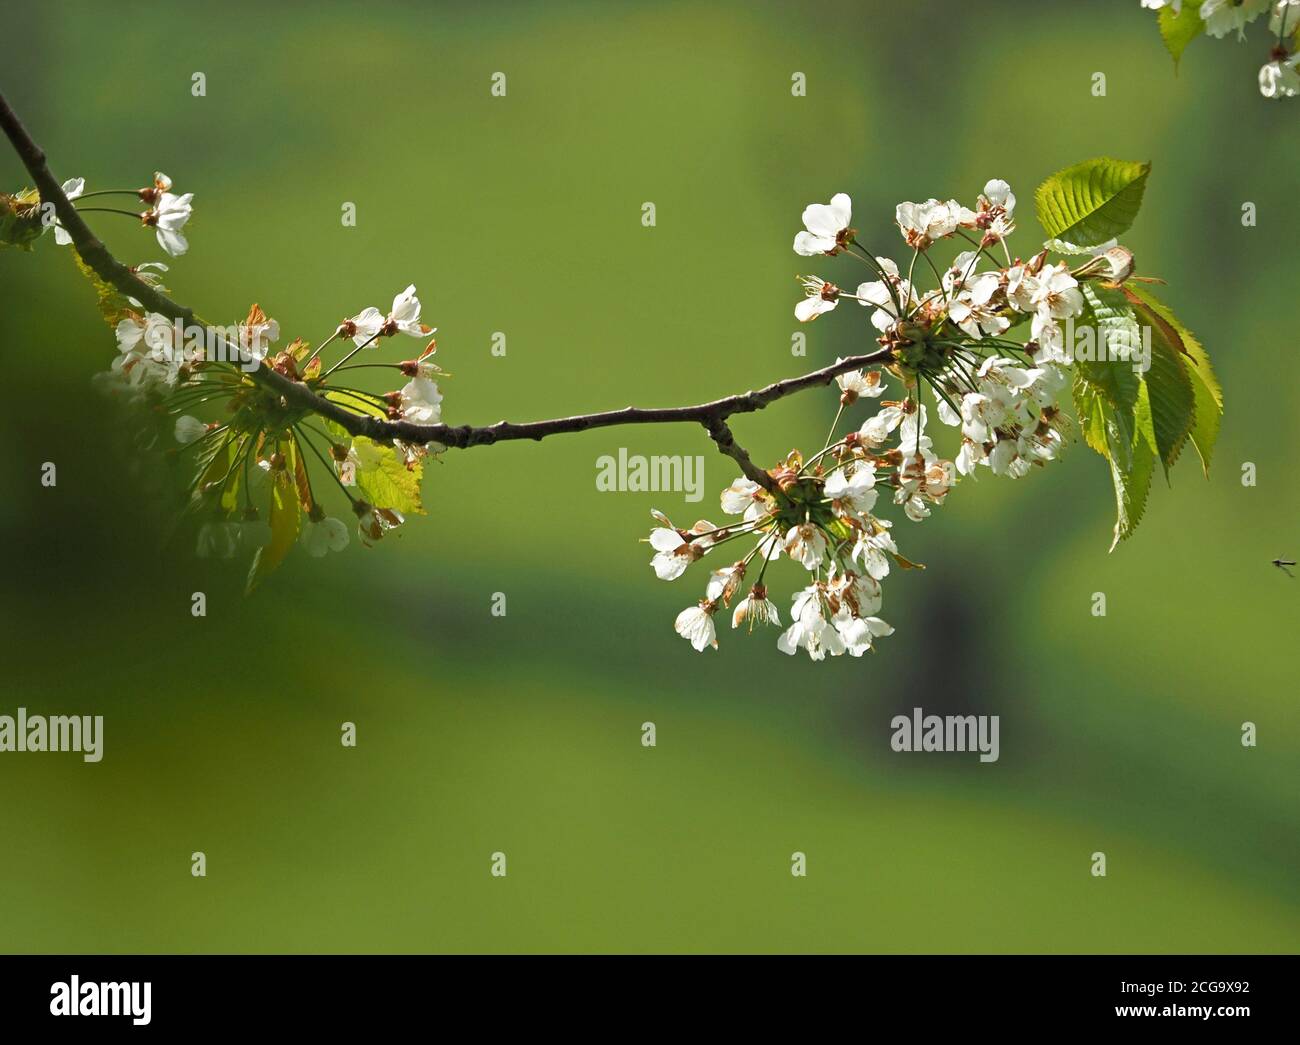 Small white flowers of Spring blossom of Ornamental Cherry tree (Prunus species) contrast with soft green background and fresh foliage England, UK Stock Photo